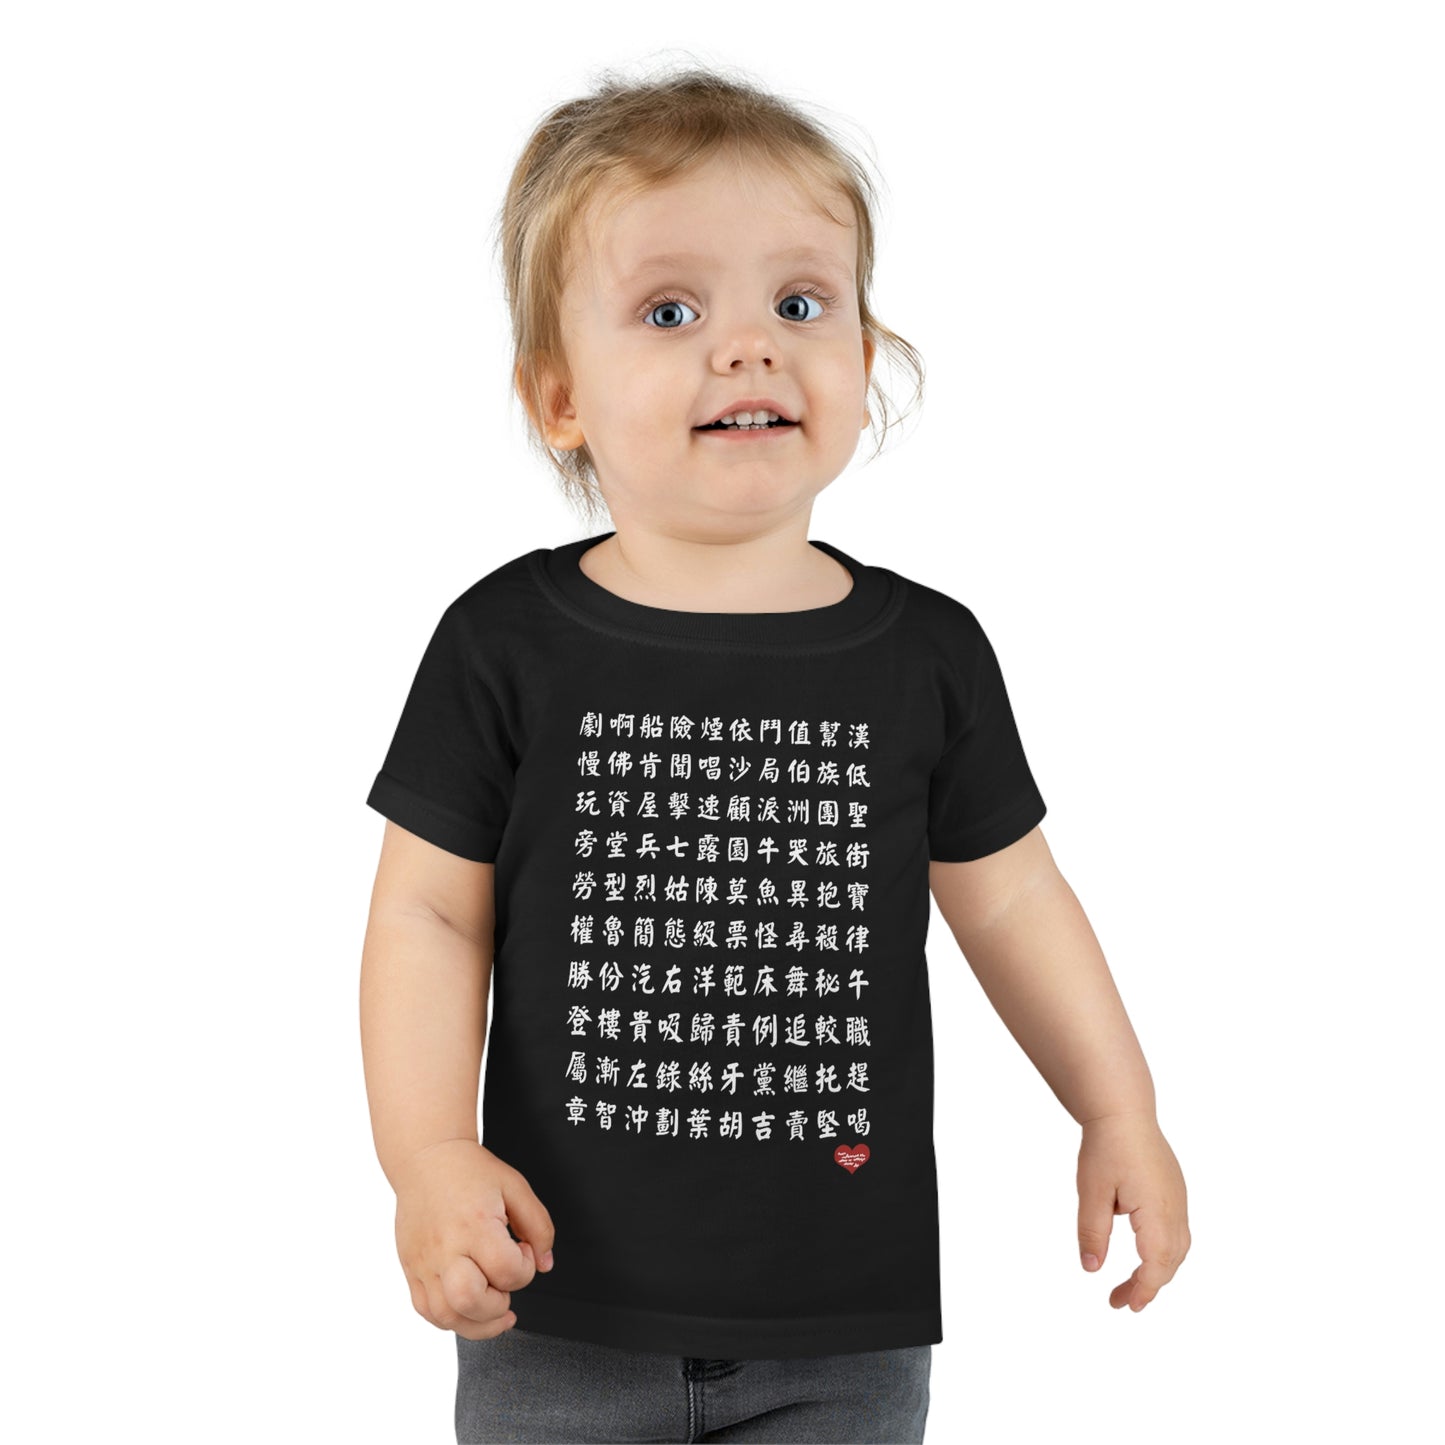 Toddler 1000 Characters Set 8,  1000漢字系列 #8 Color Block T-shirts